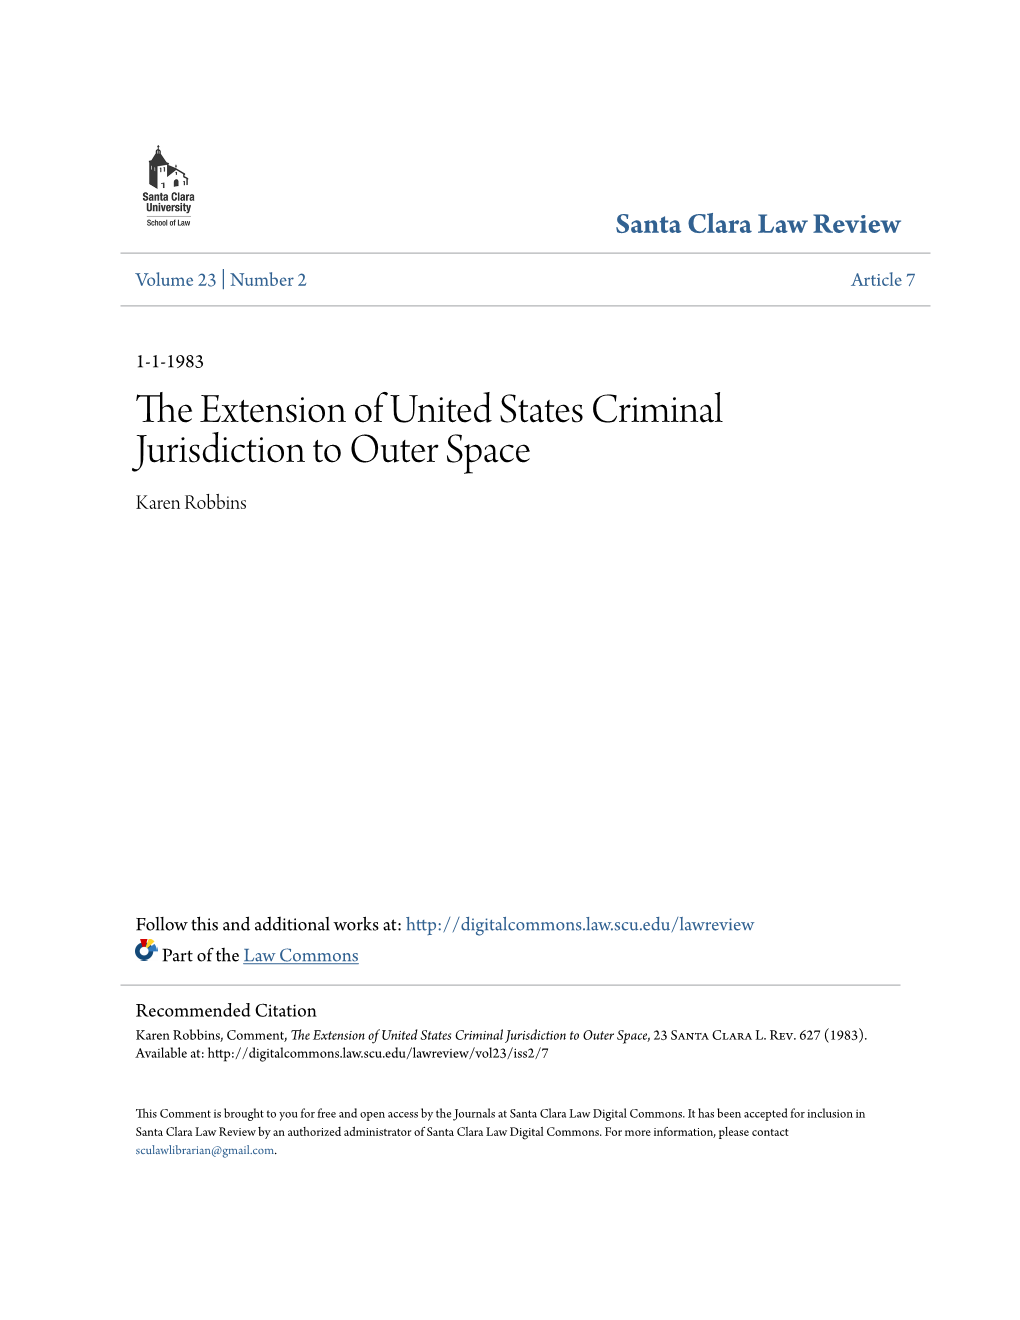 The Extension of United States Criminal Jurisdiction to Outer Space Karen Robbins